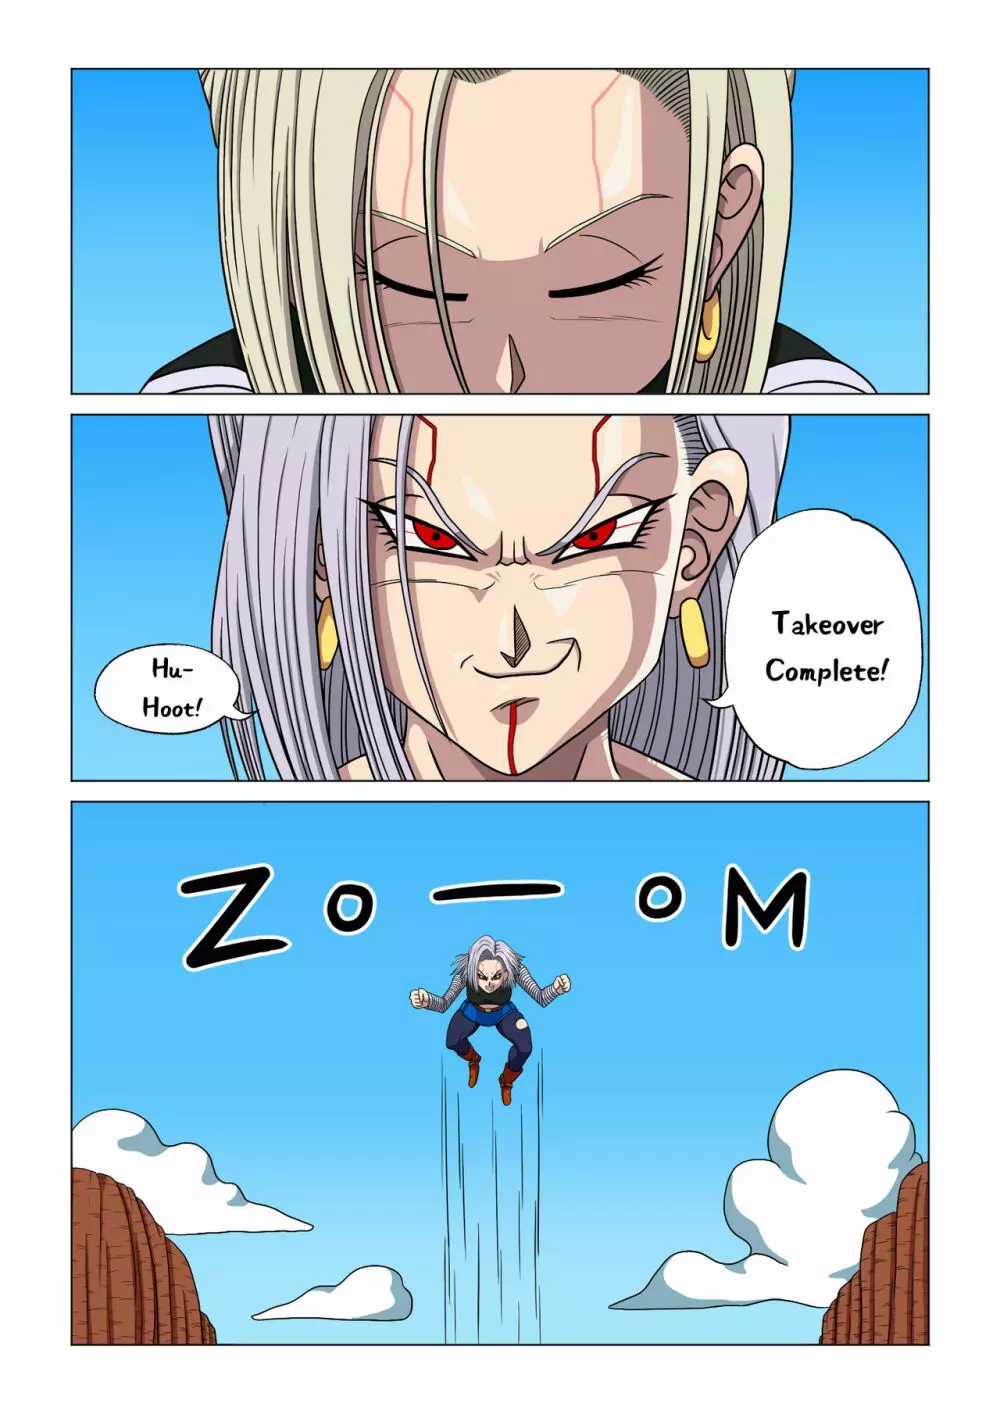 Android 18 vs Baby 14ページ